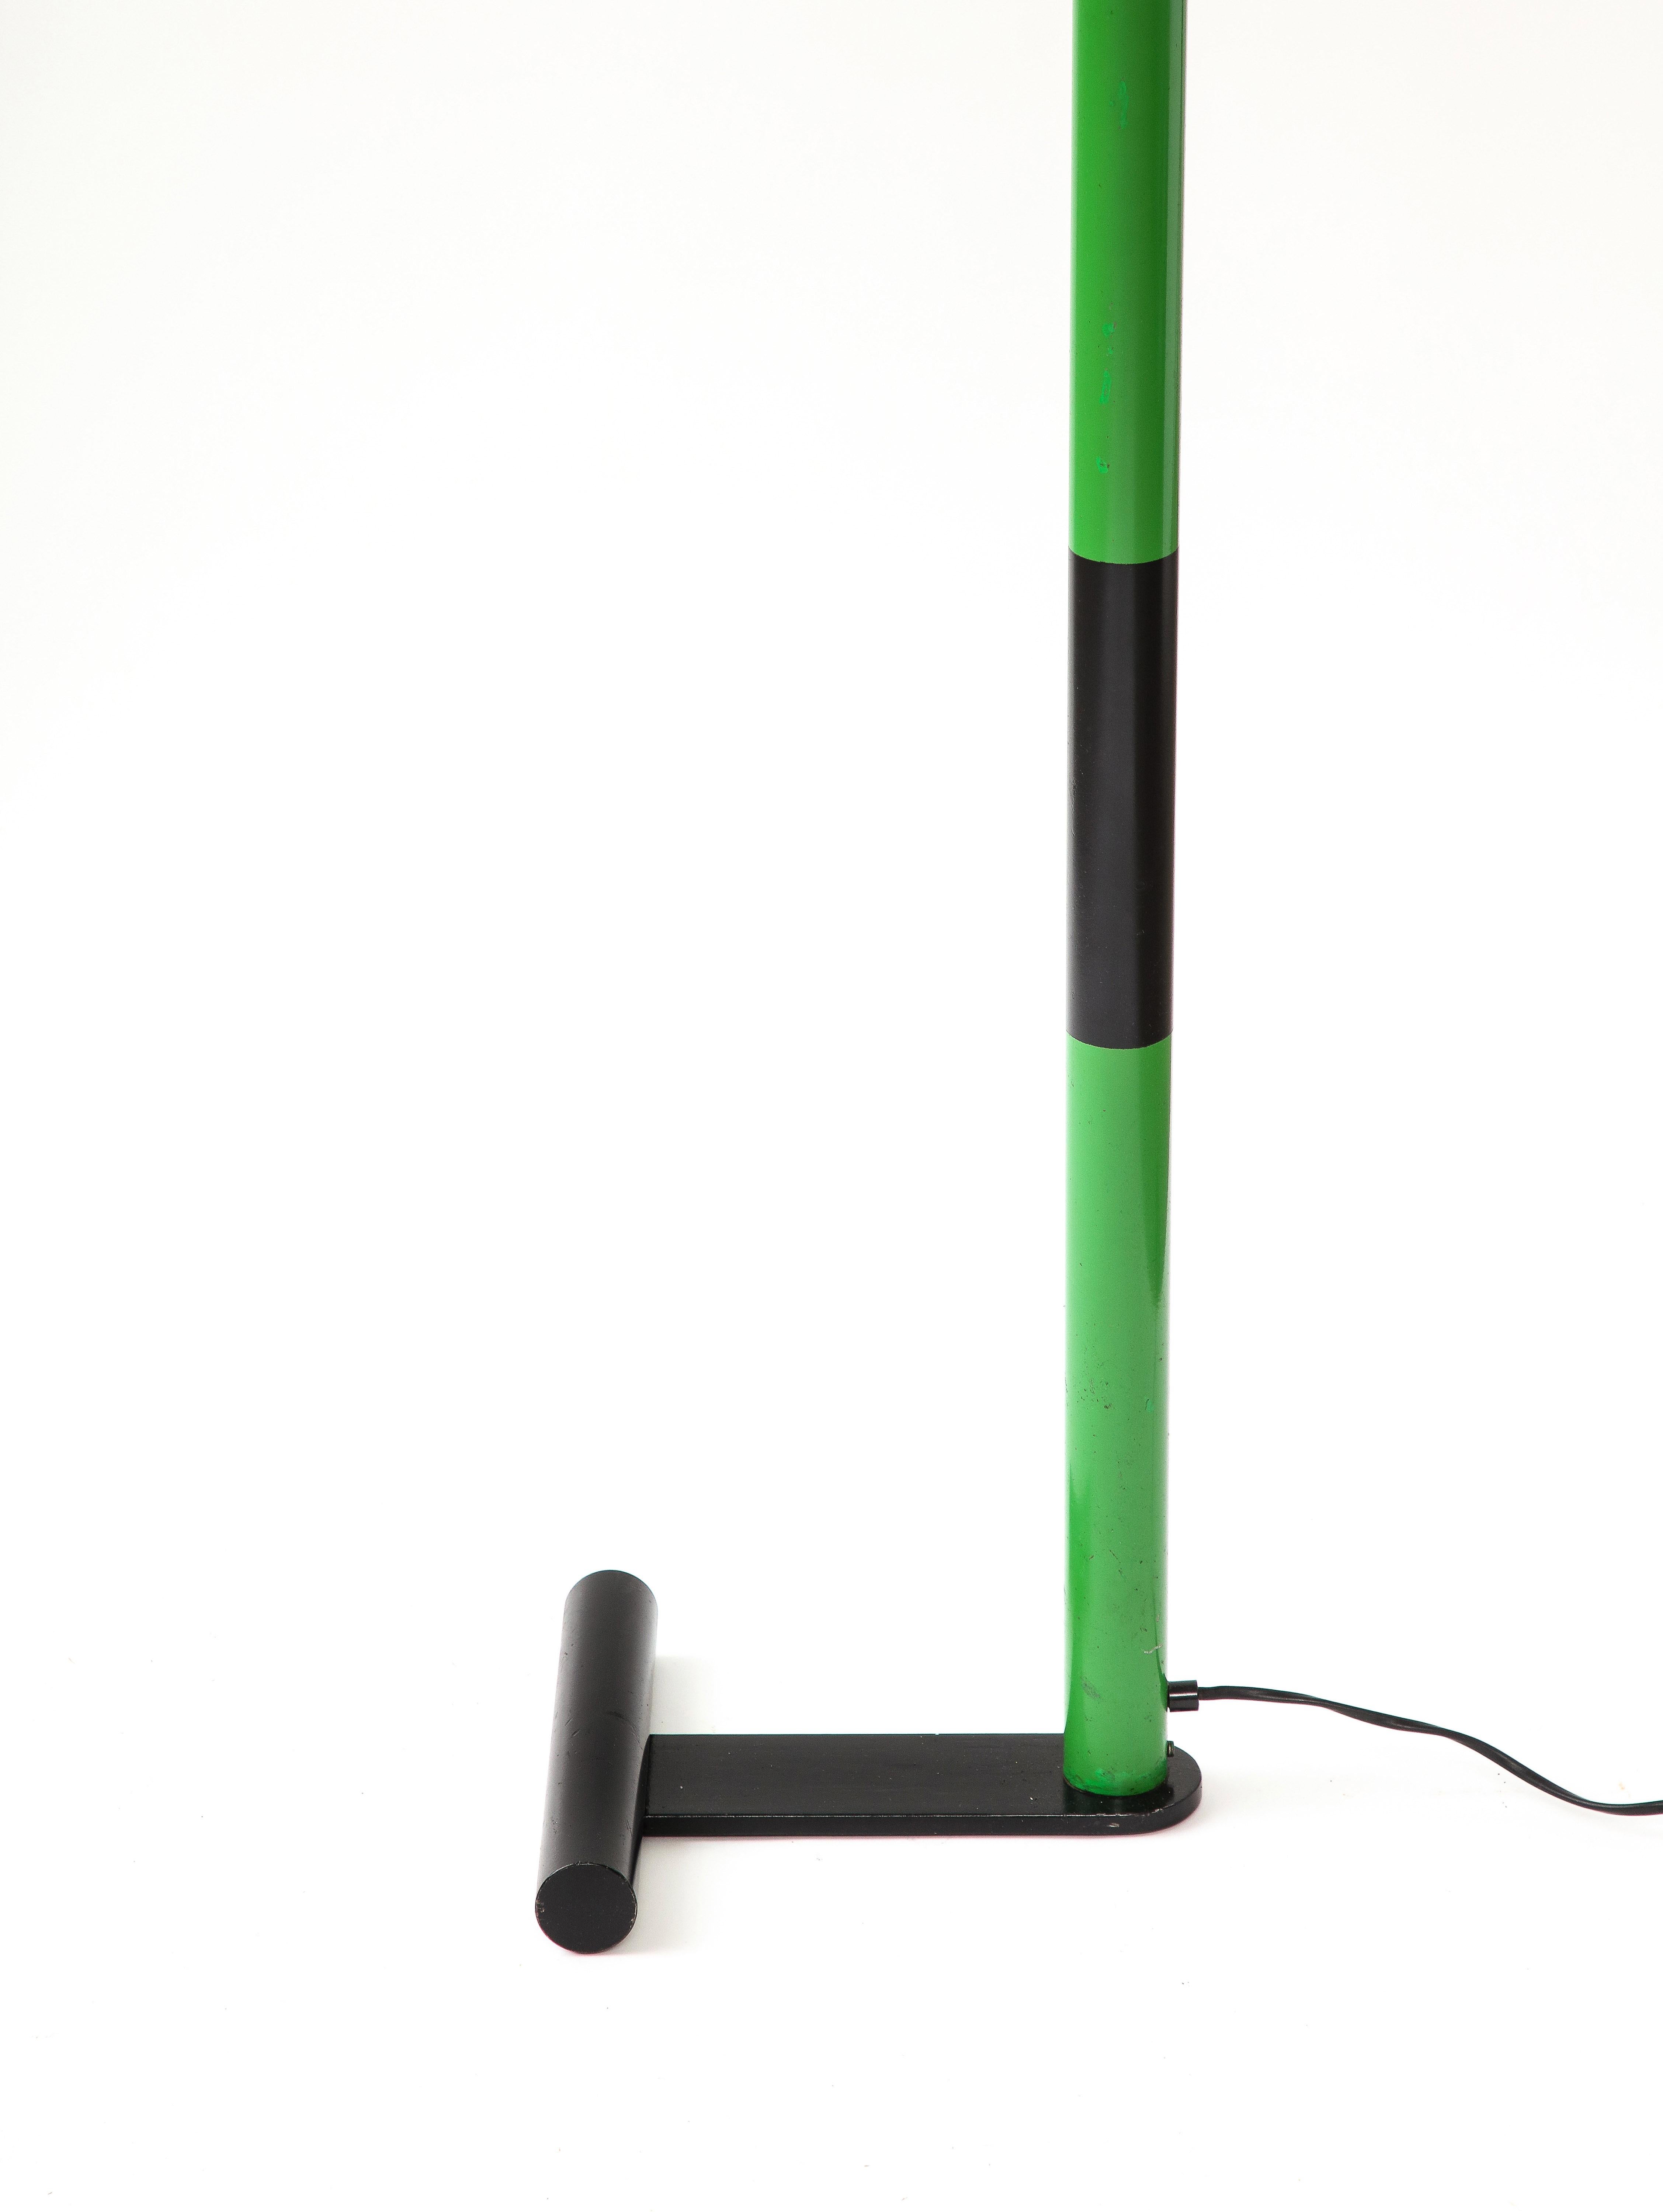 Lacquered Green Metal Floor Lamp, Italy, c. 1970 For Sale 6